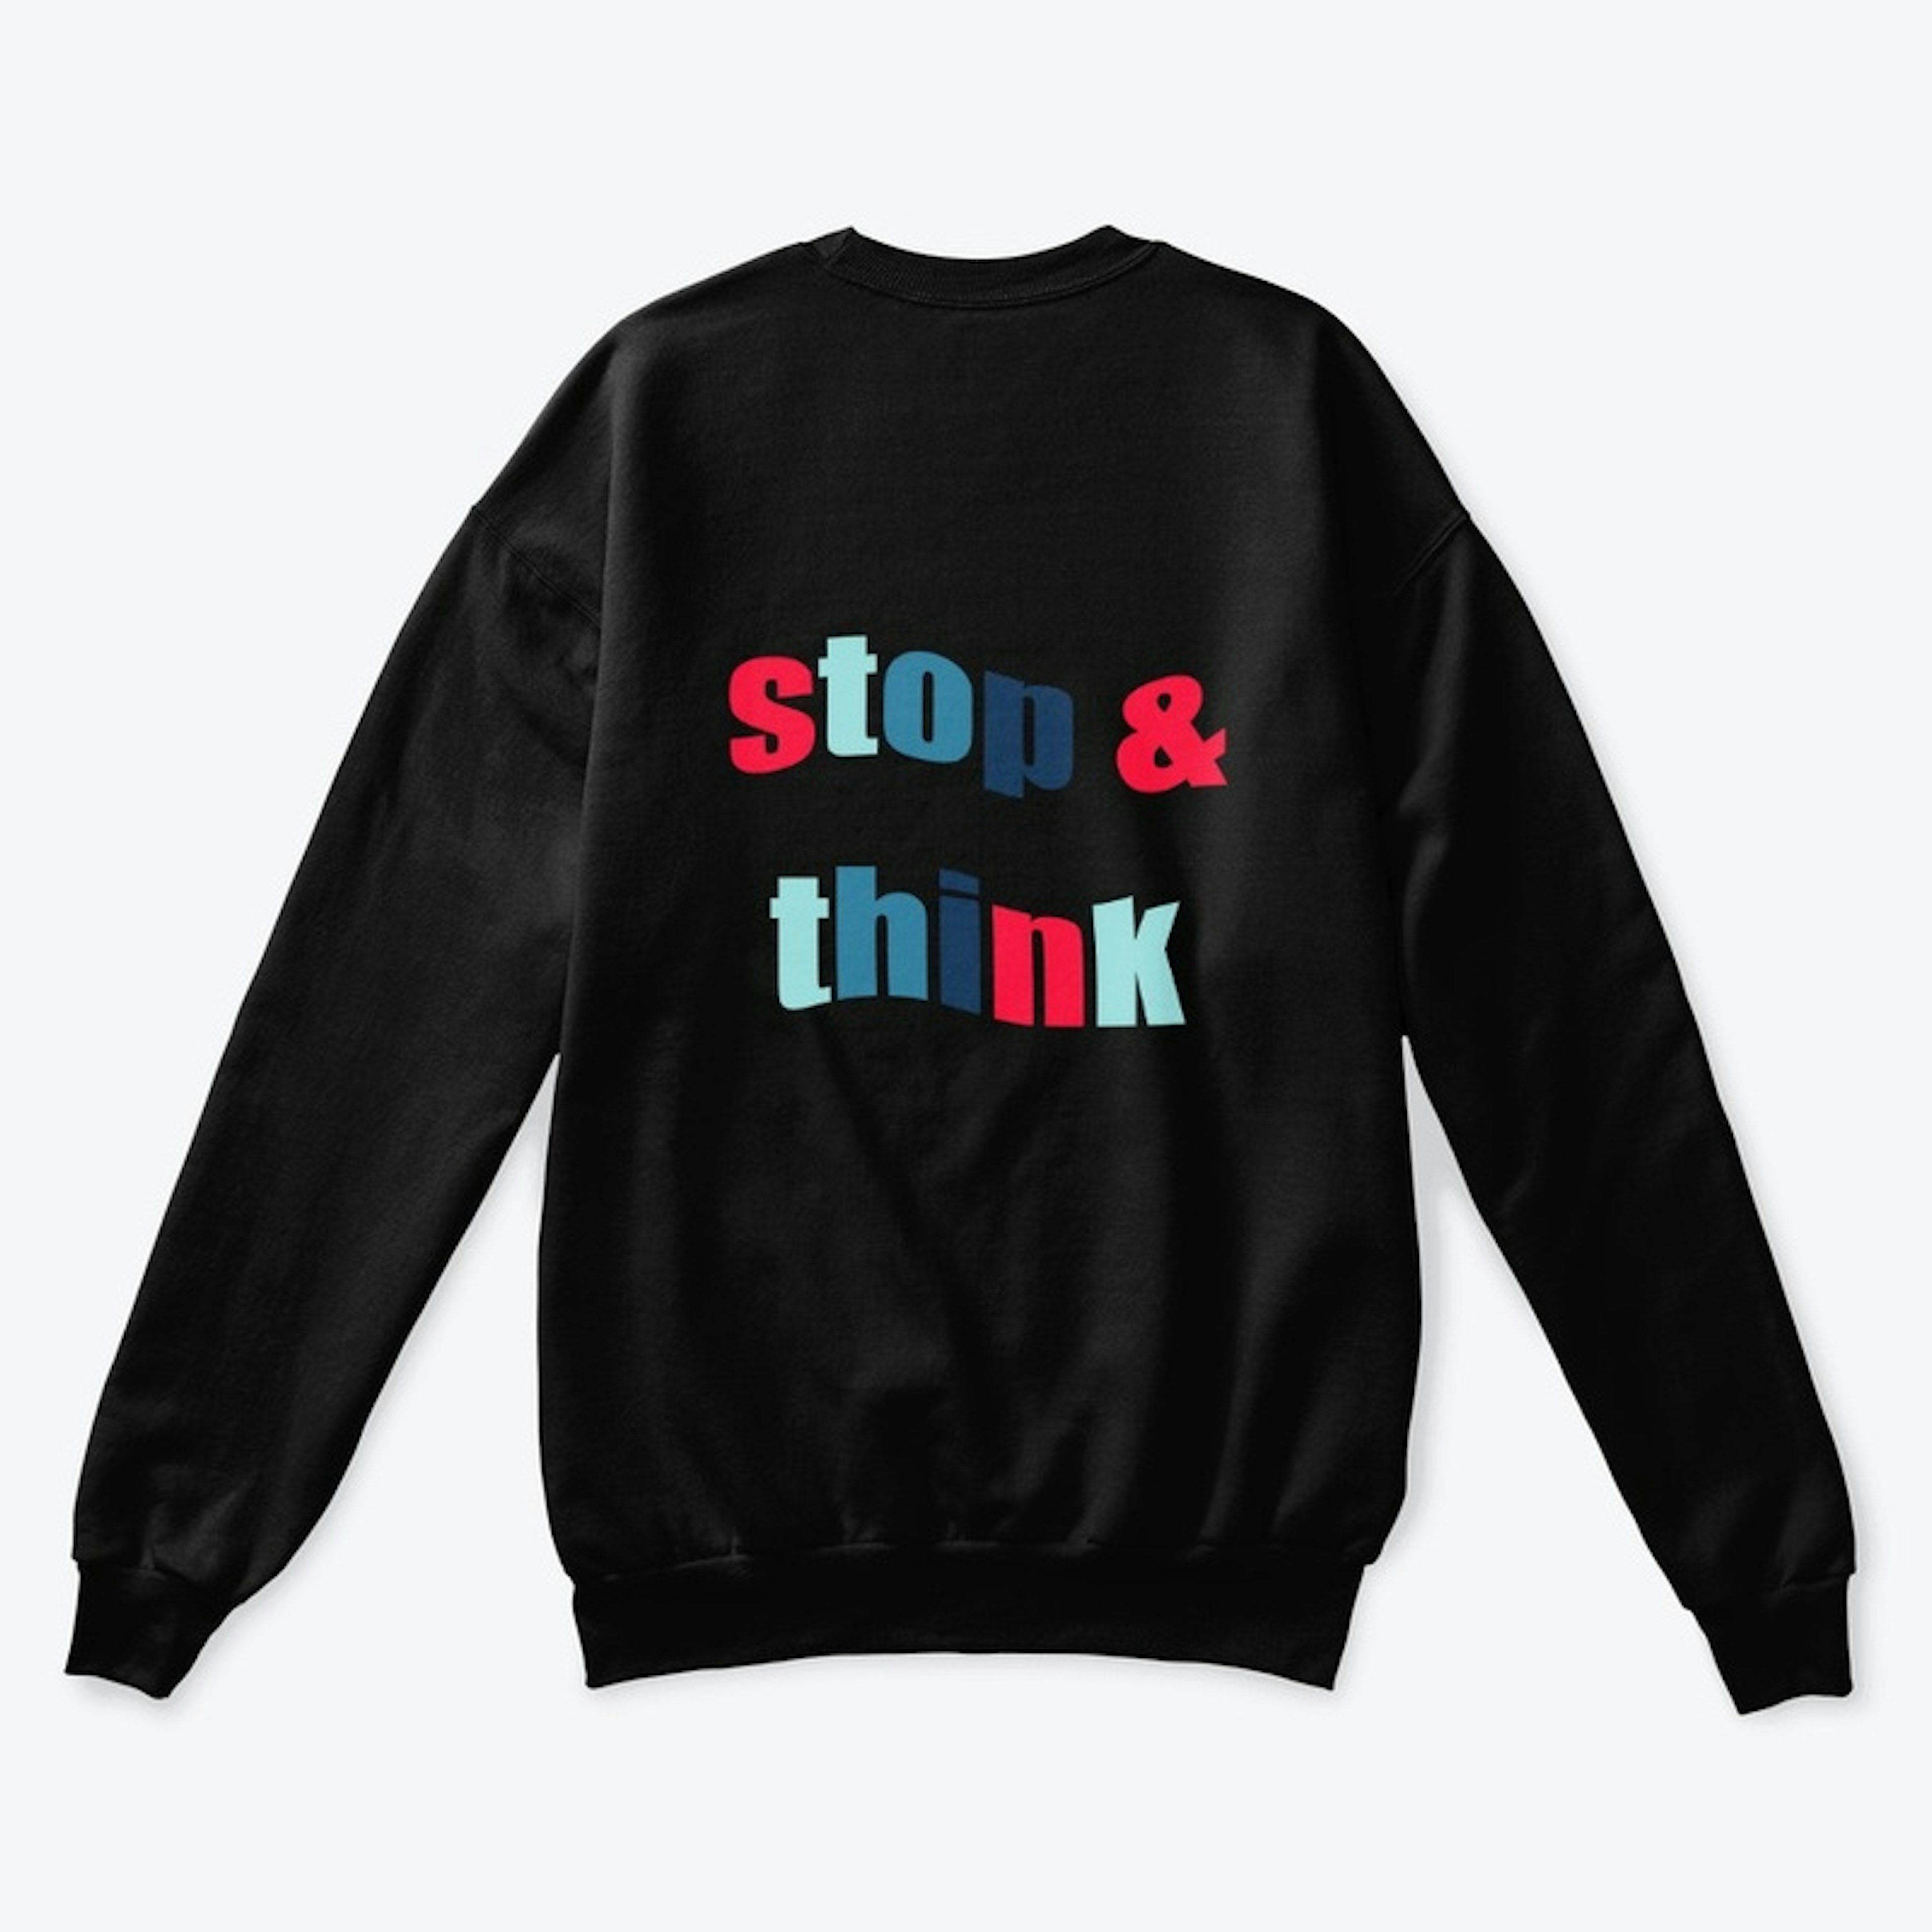 stop & think